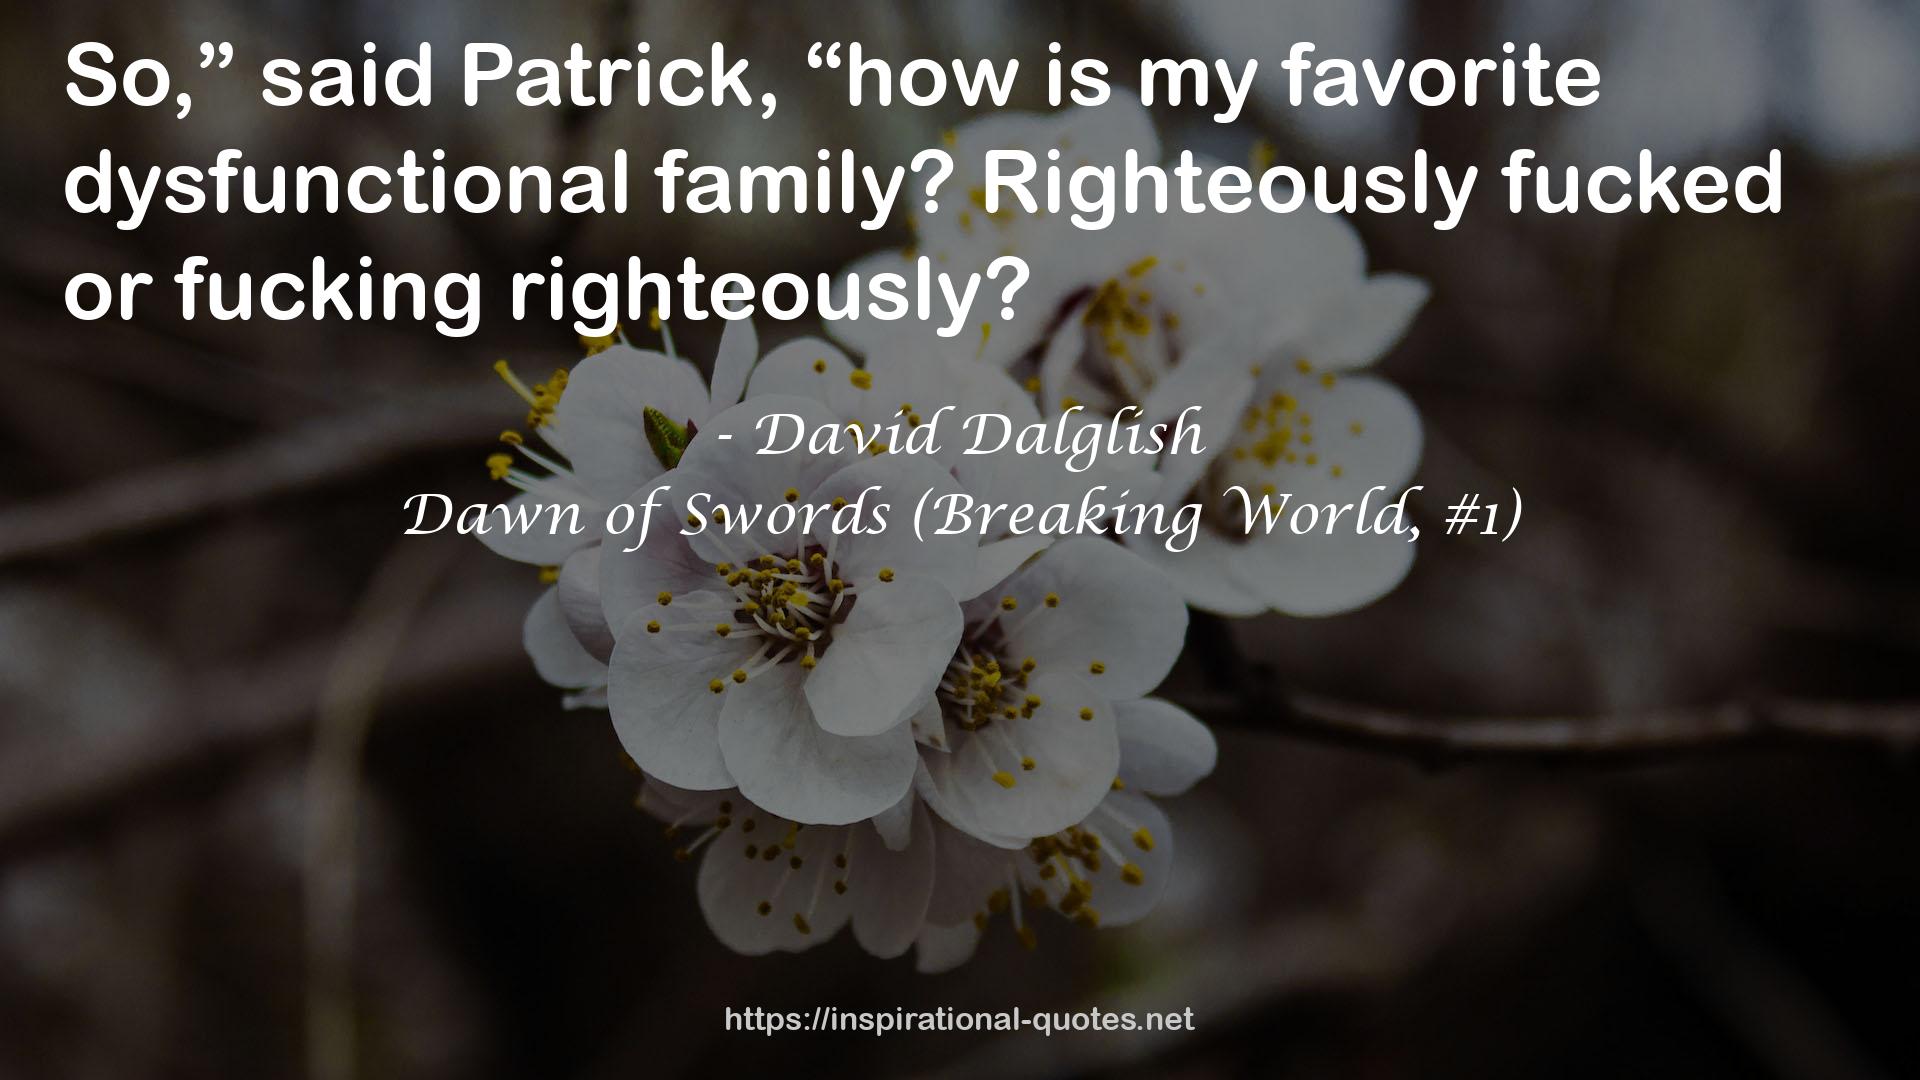 Dawn of Swords (Breaking World, #1) QUOTES